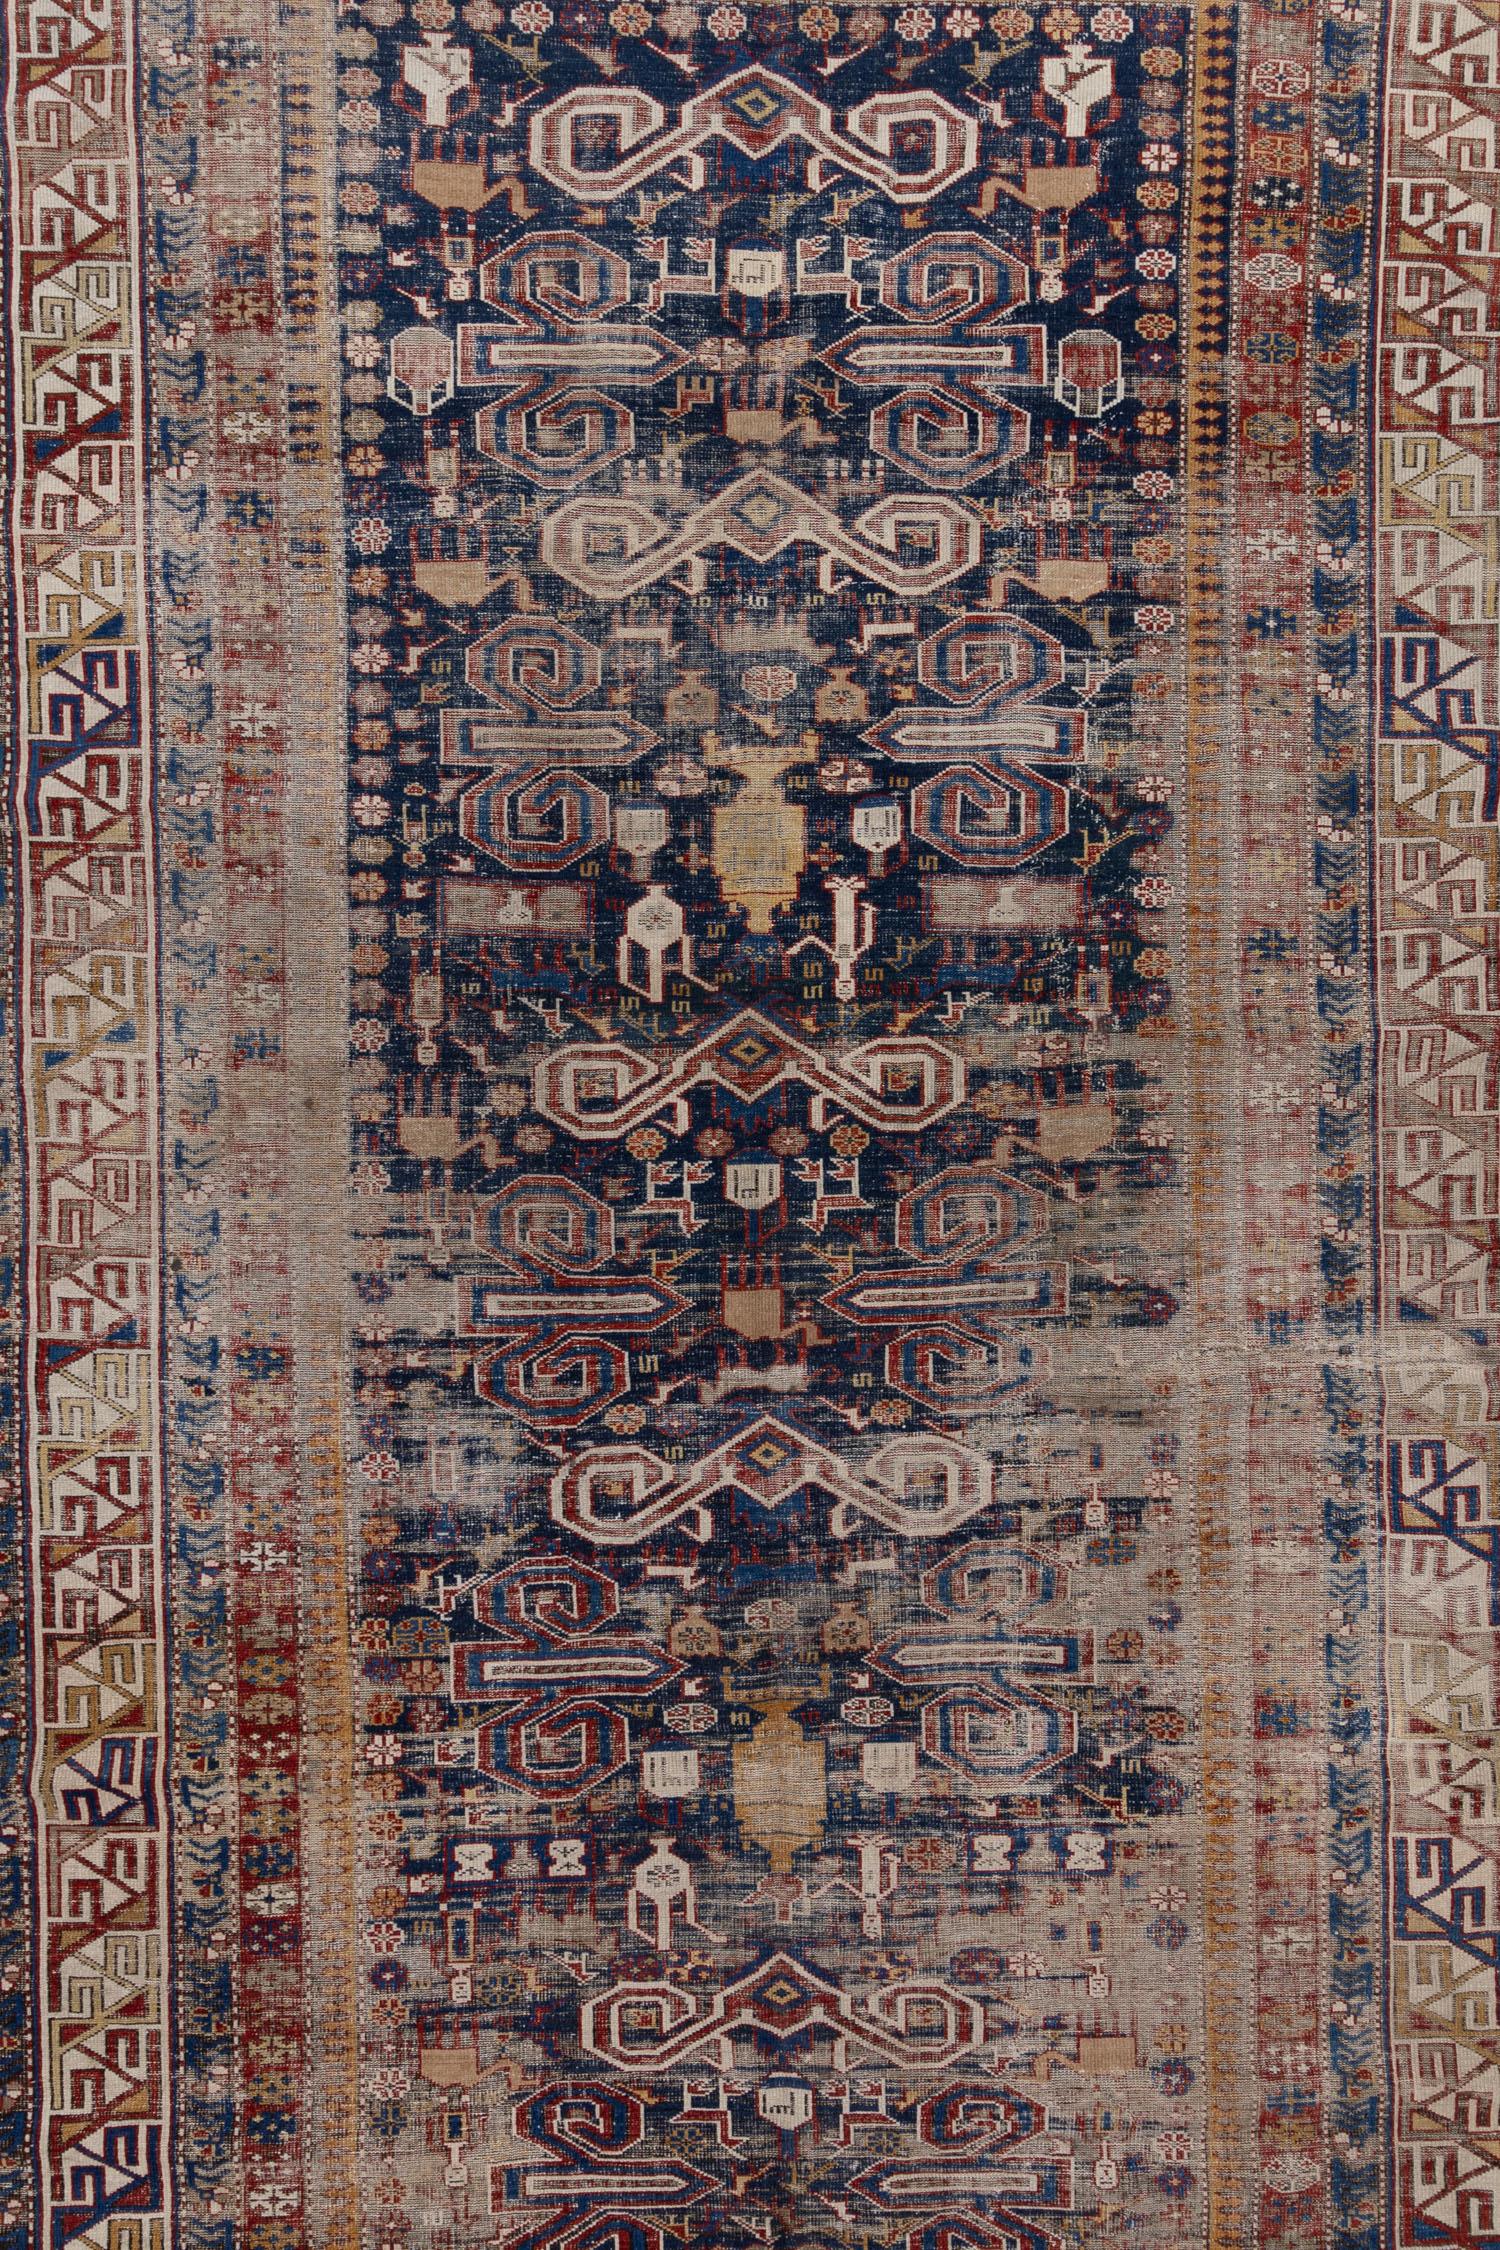 Beautiful deep blue field Caucasian Shirvan rug from the late 19th century with wonderful history and soul. Antique Shirvan rugs, originating from the ancient city of Shirvan in present-day Iran, are adorned with intricate and meaningful symbols.